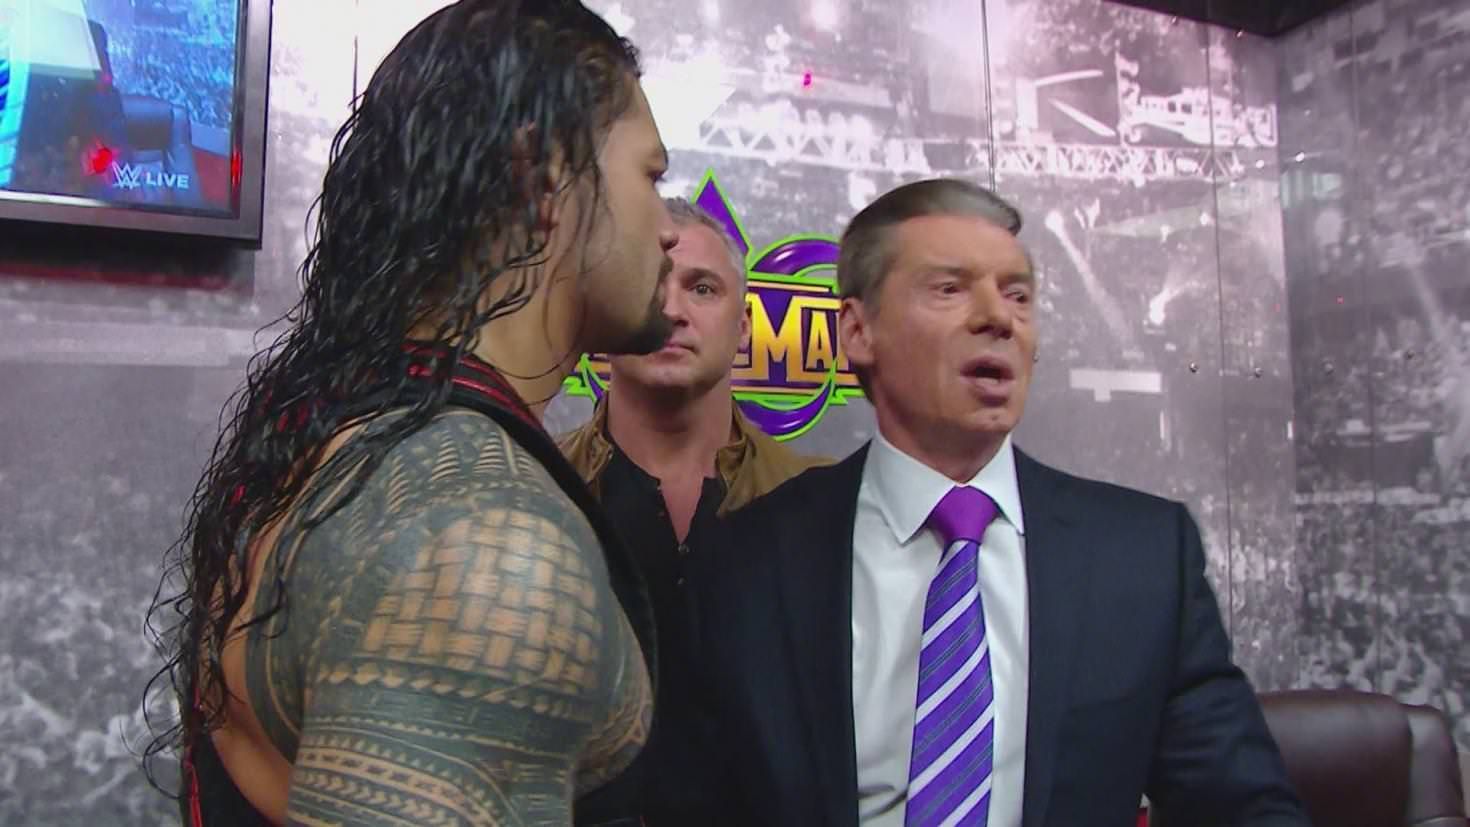 Roman Reigns and Vince McMahon backstage